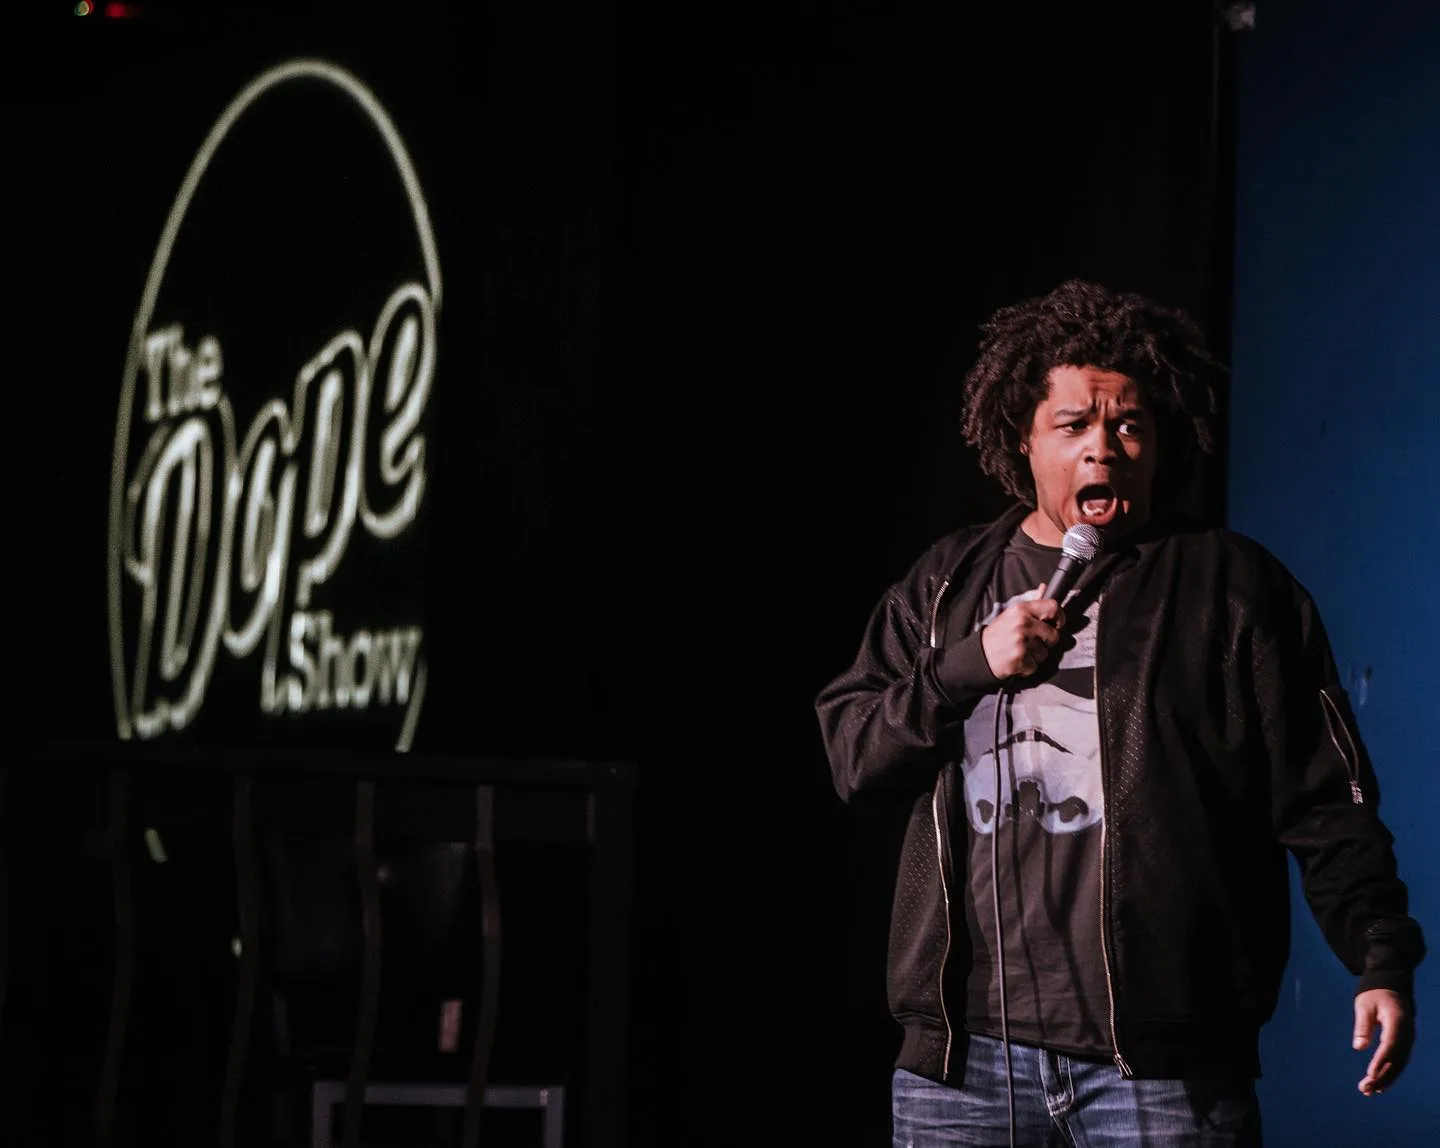 Comedian AC O'Neal performing onstage at The Dope Show.